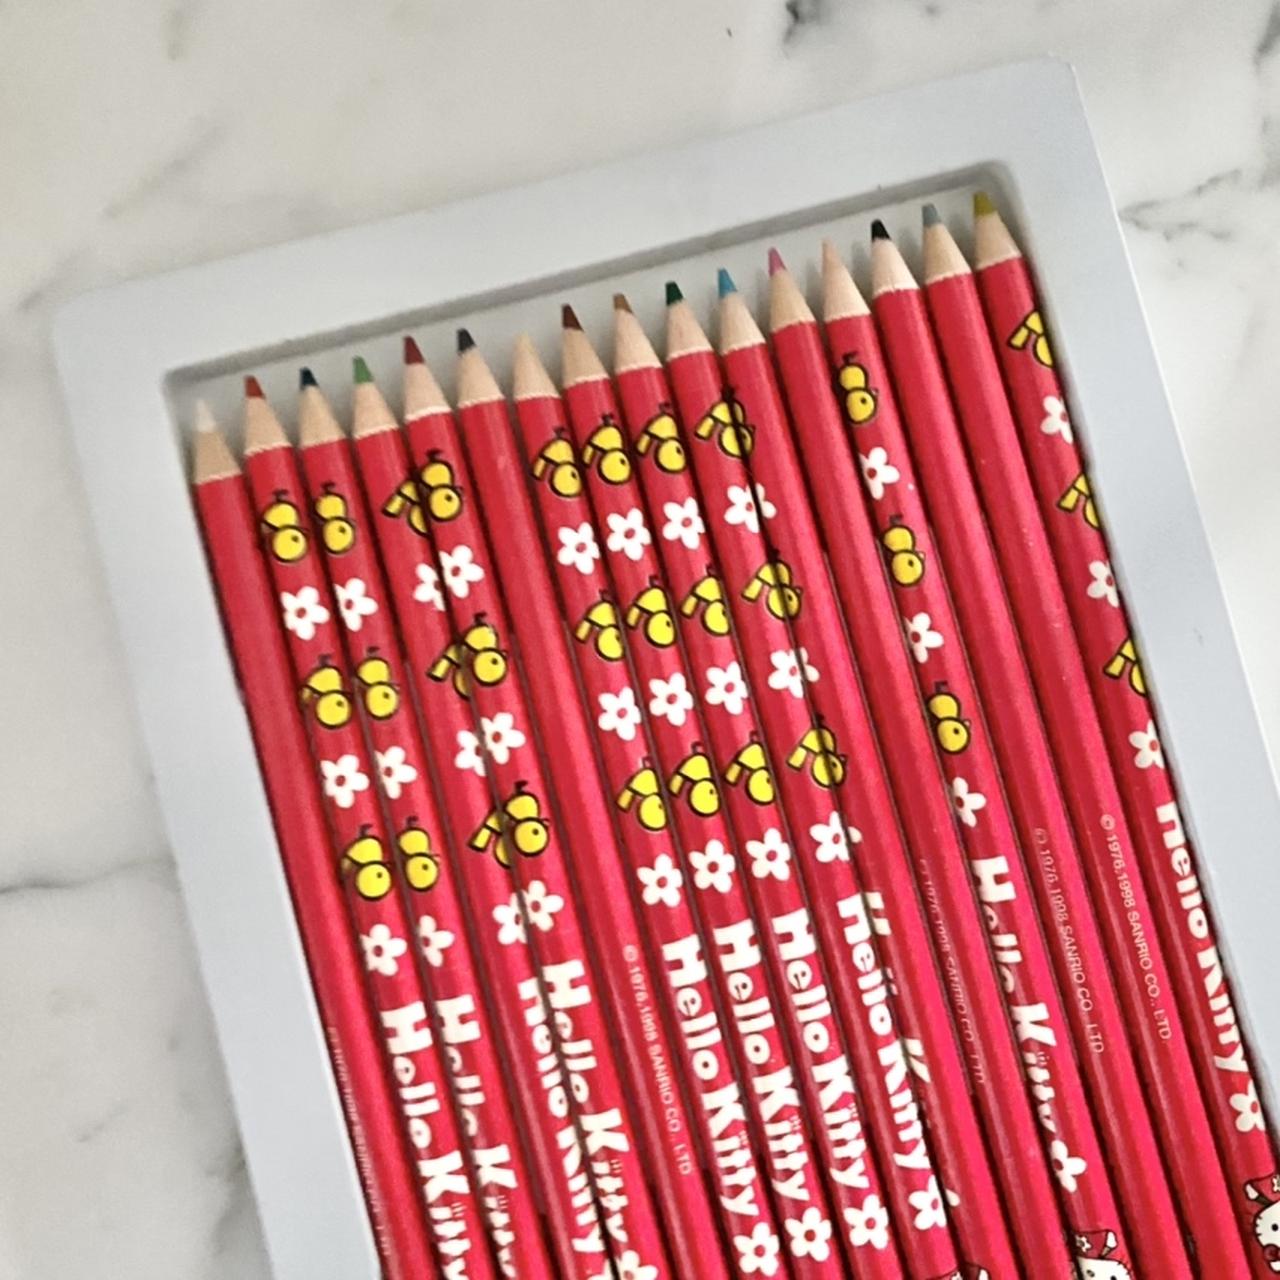 Vintage 1990s Hello Kitty colored pencil set by - Depop